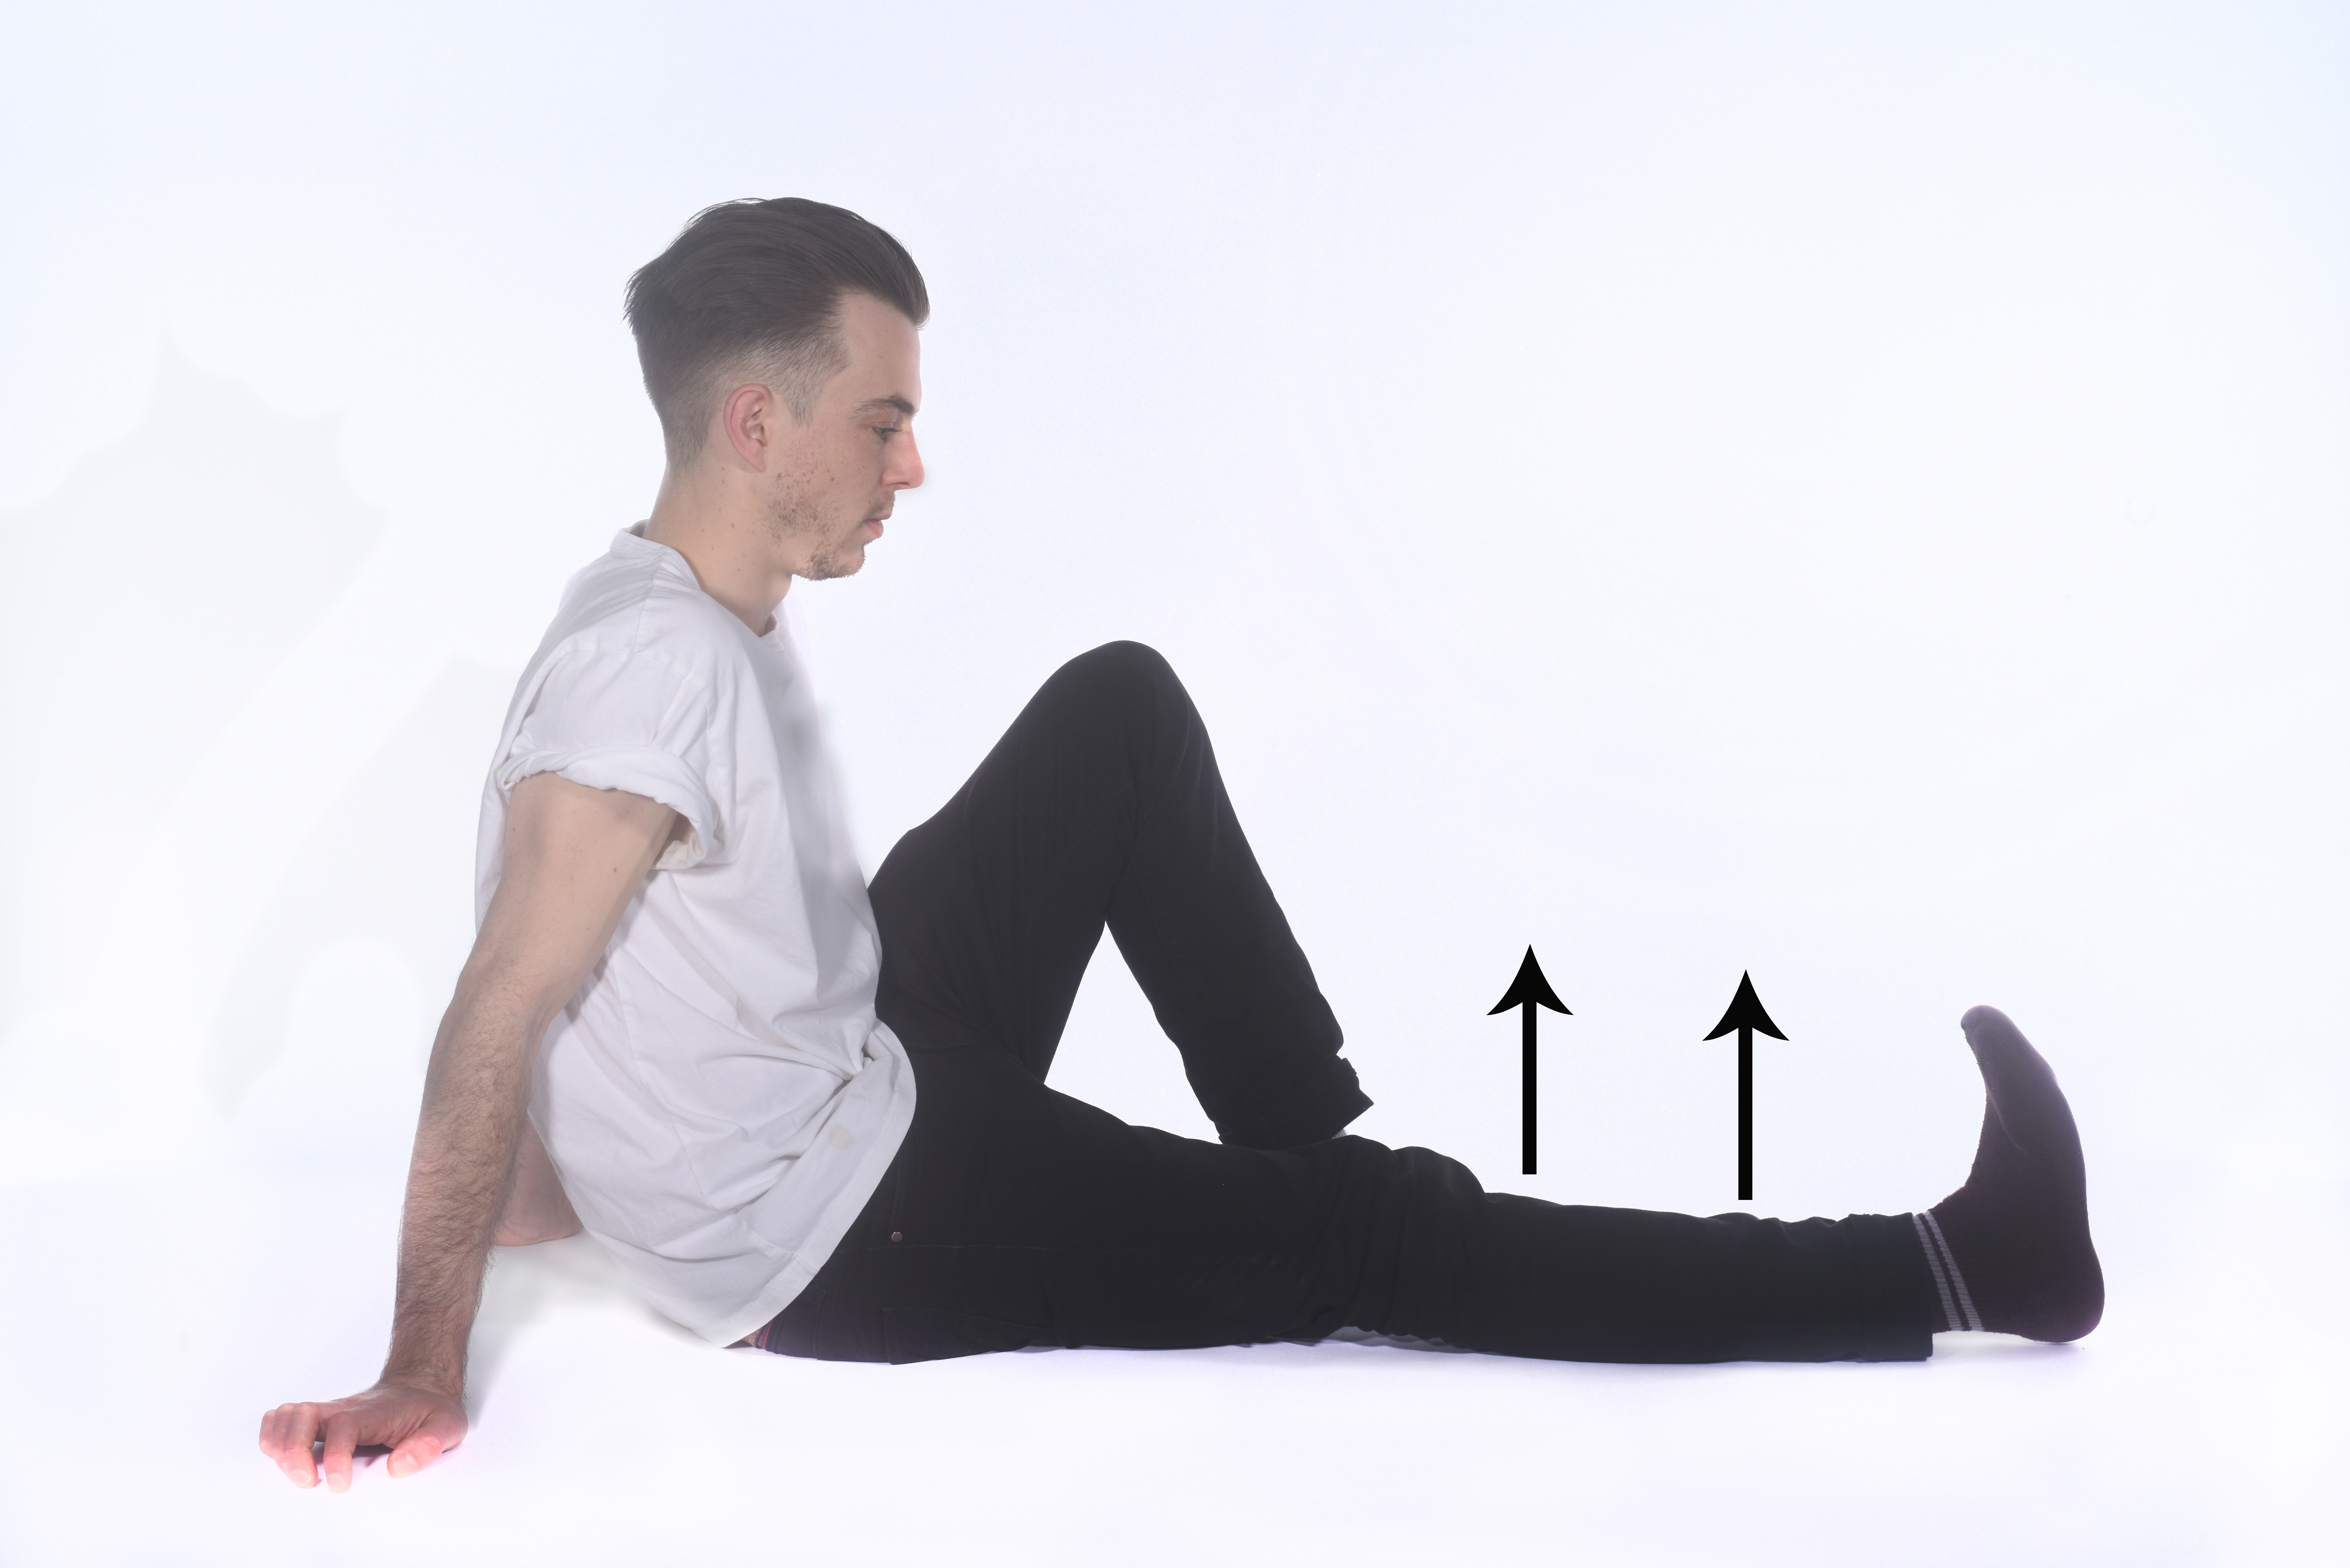 Sitting on the floor, with legs out in front. Lifting your leg straight off the floor without bending your knee.